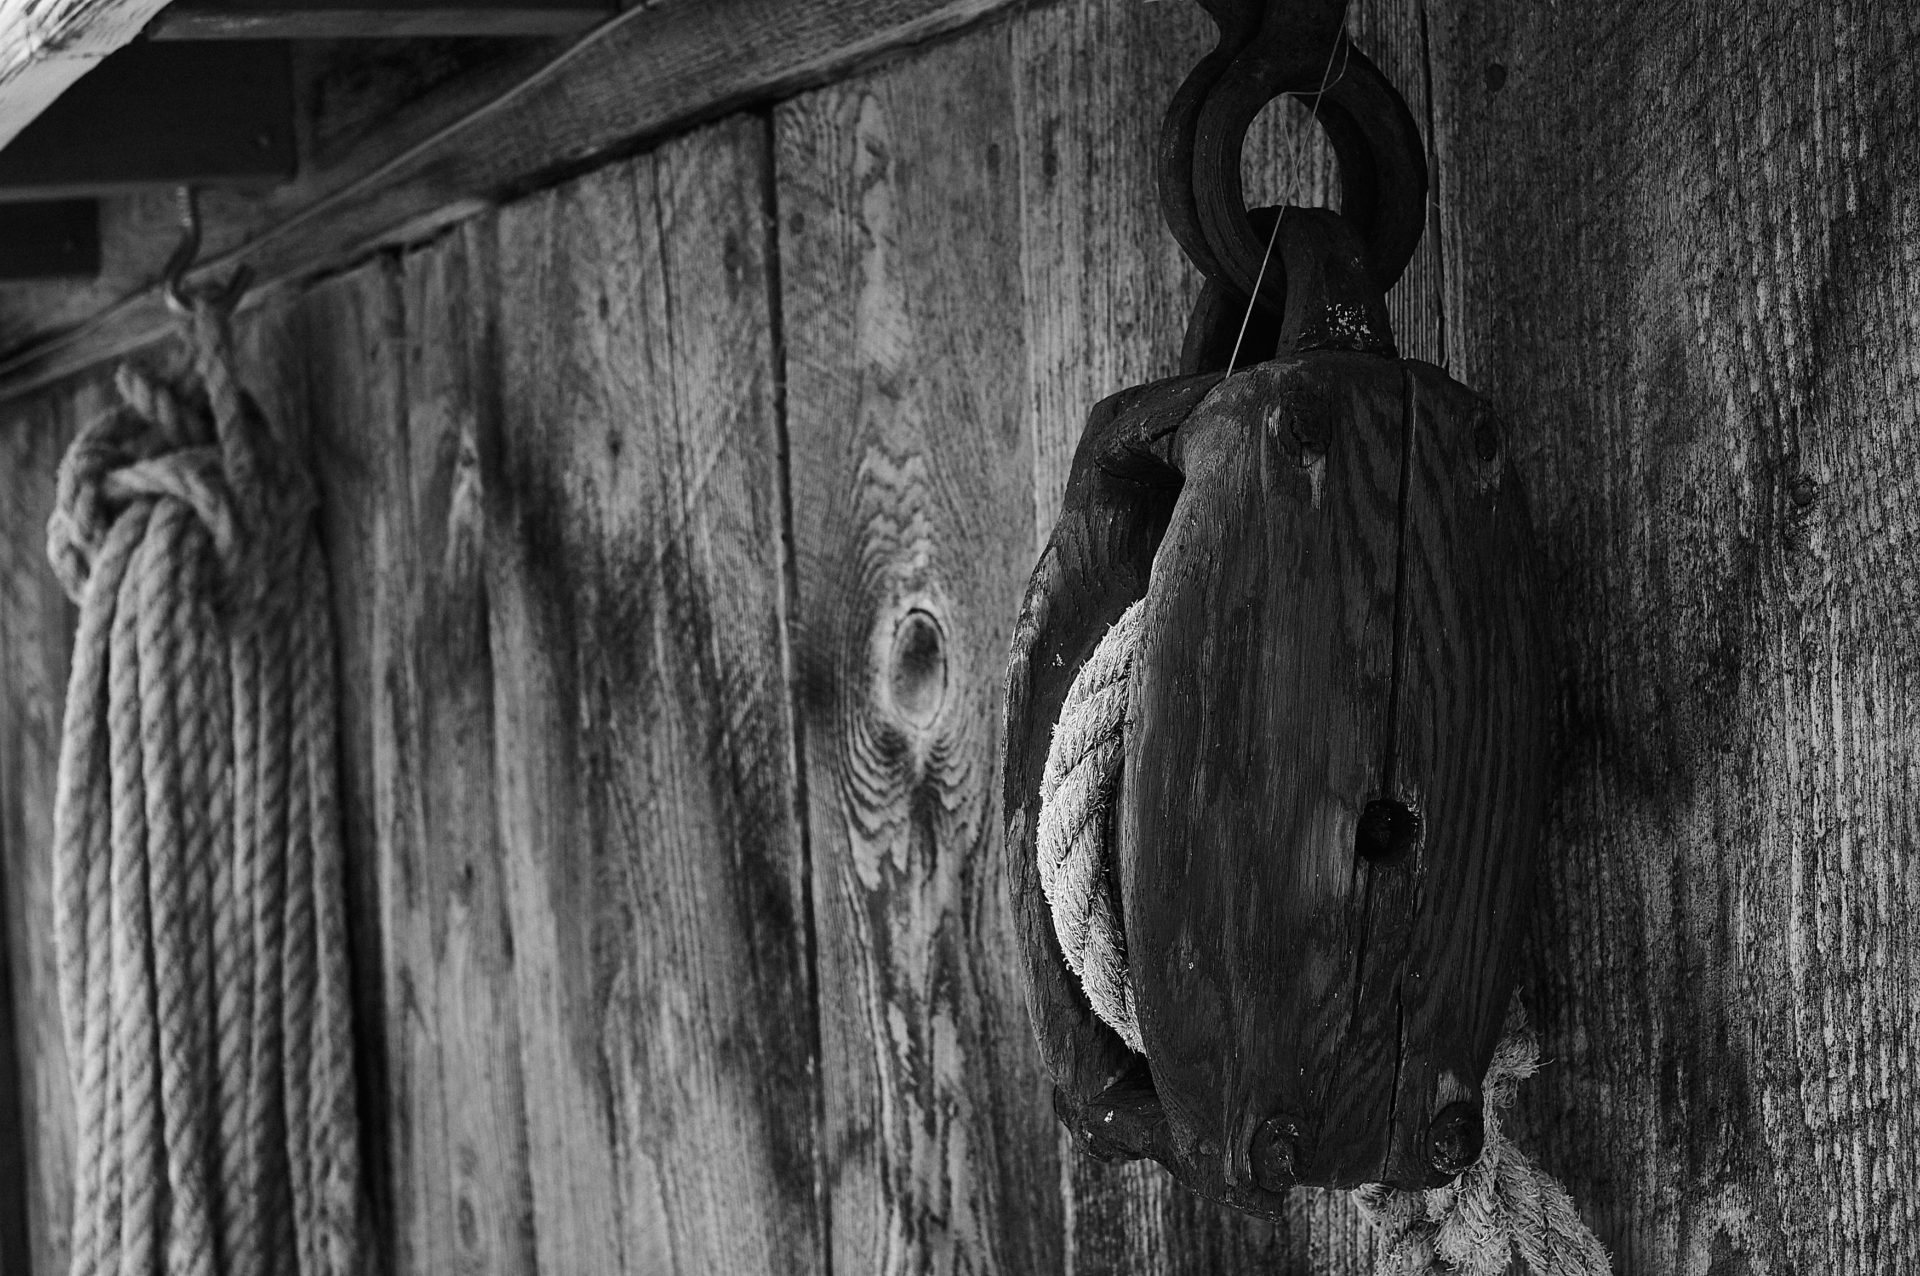 Woden block also known as pulley hanging from the side of an old fishing shanty with a hemp rope hanging in the background